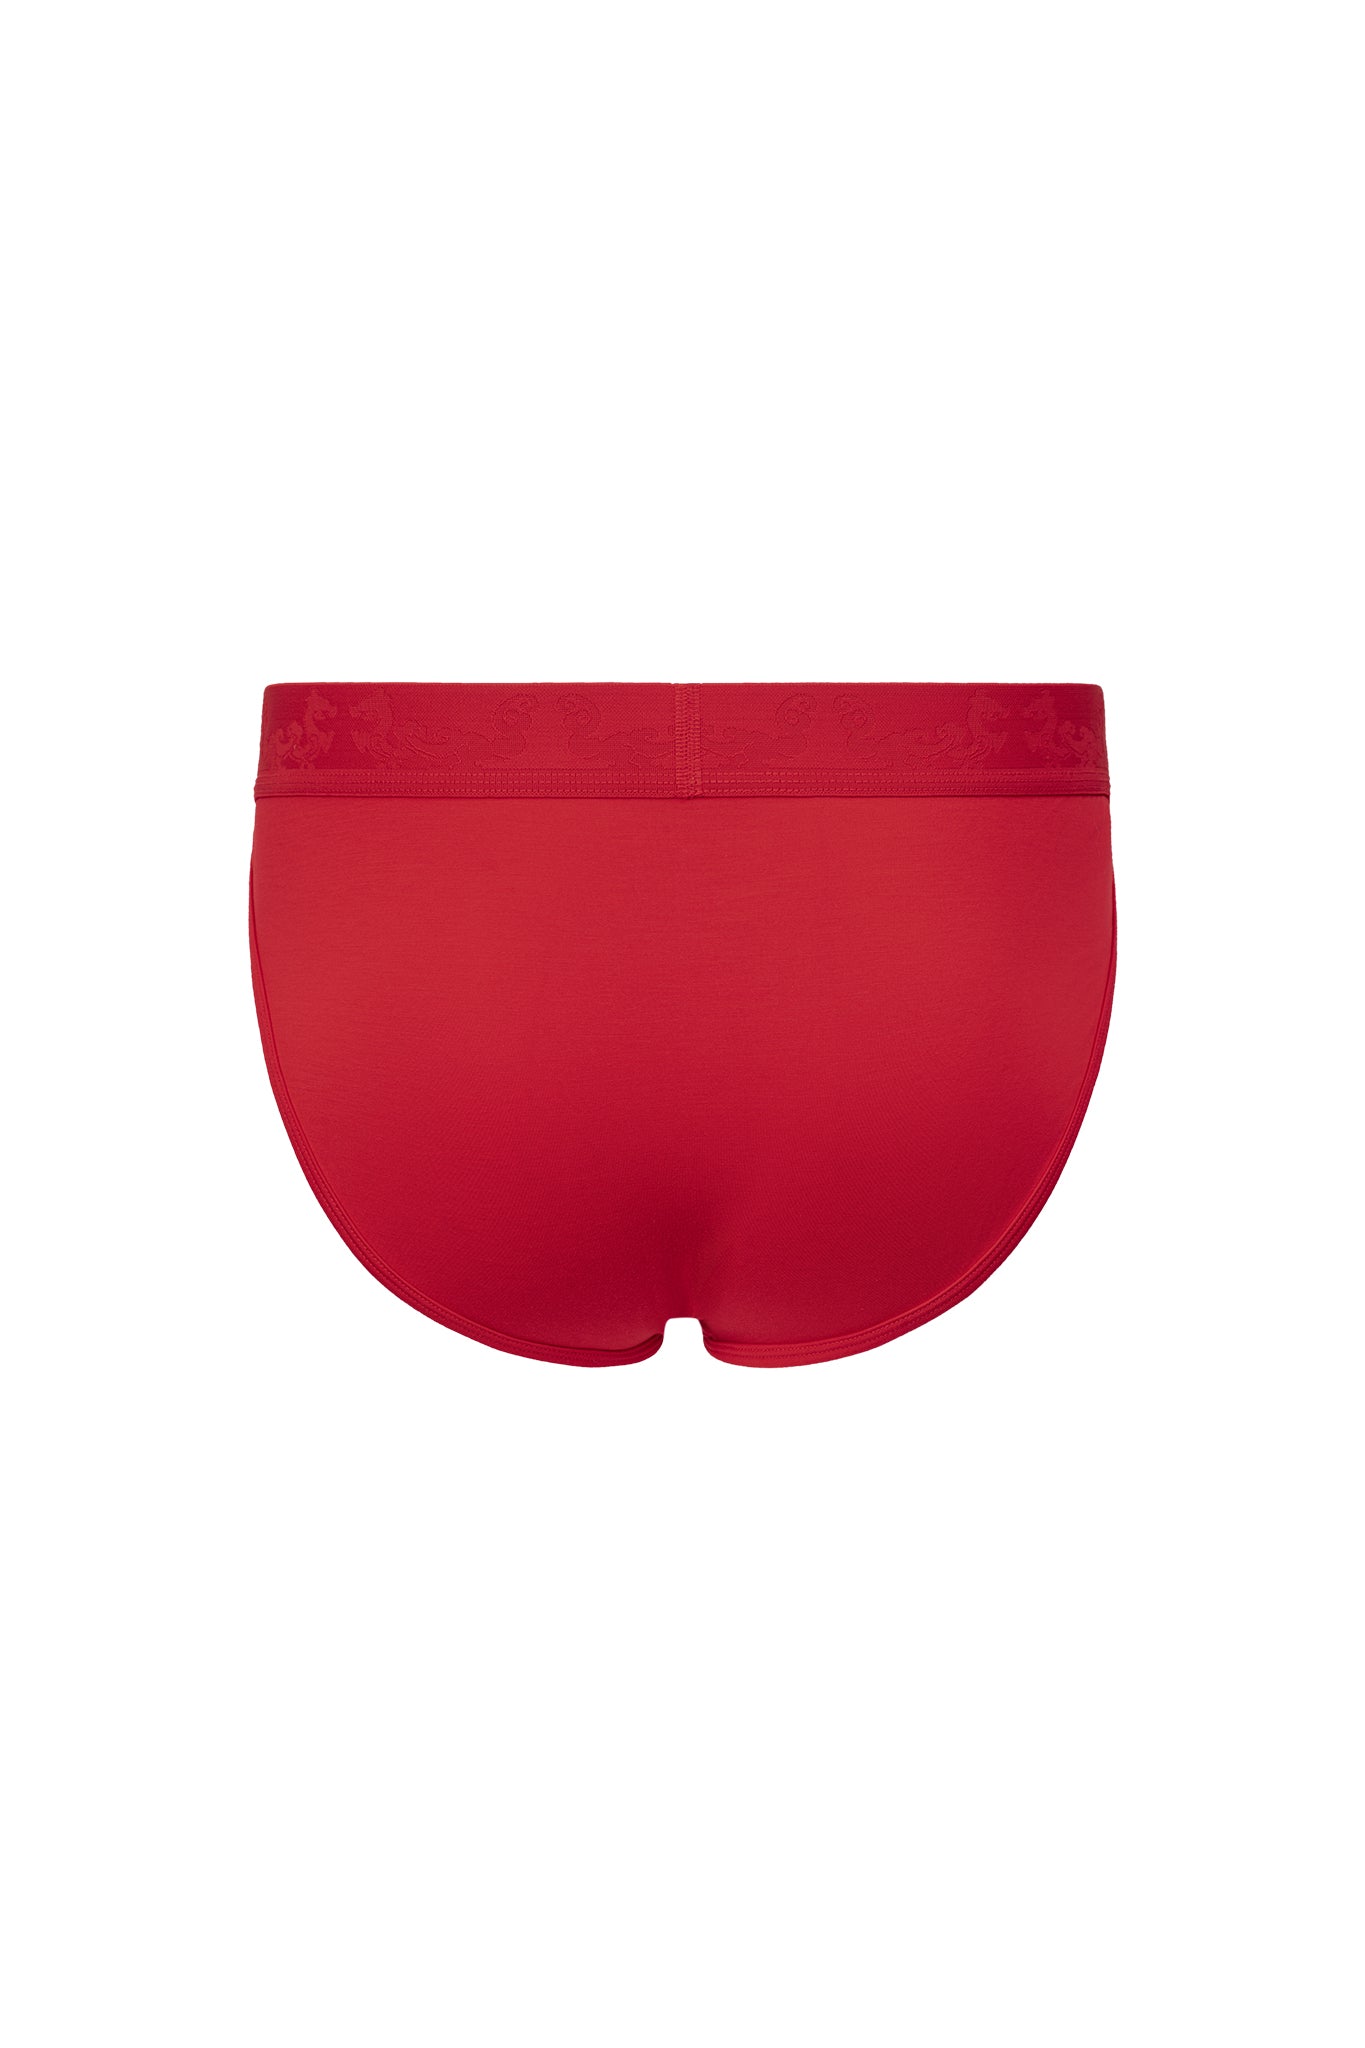 CHILONG PROSPERITY SPORT BRIEF - CHILONG RED